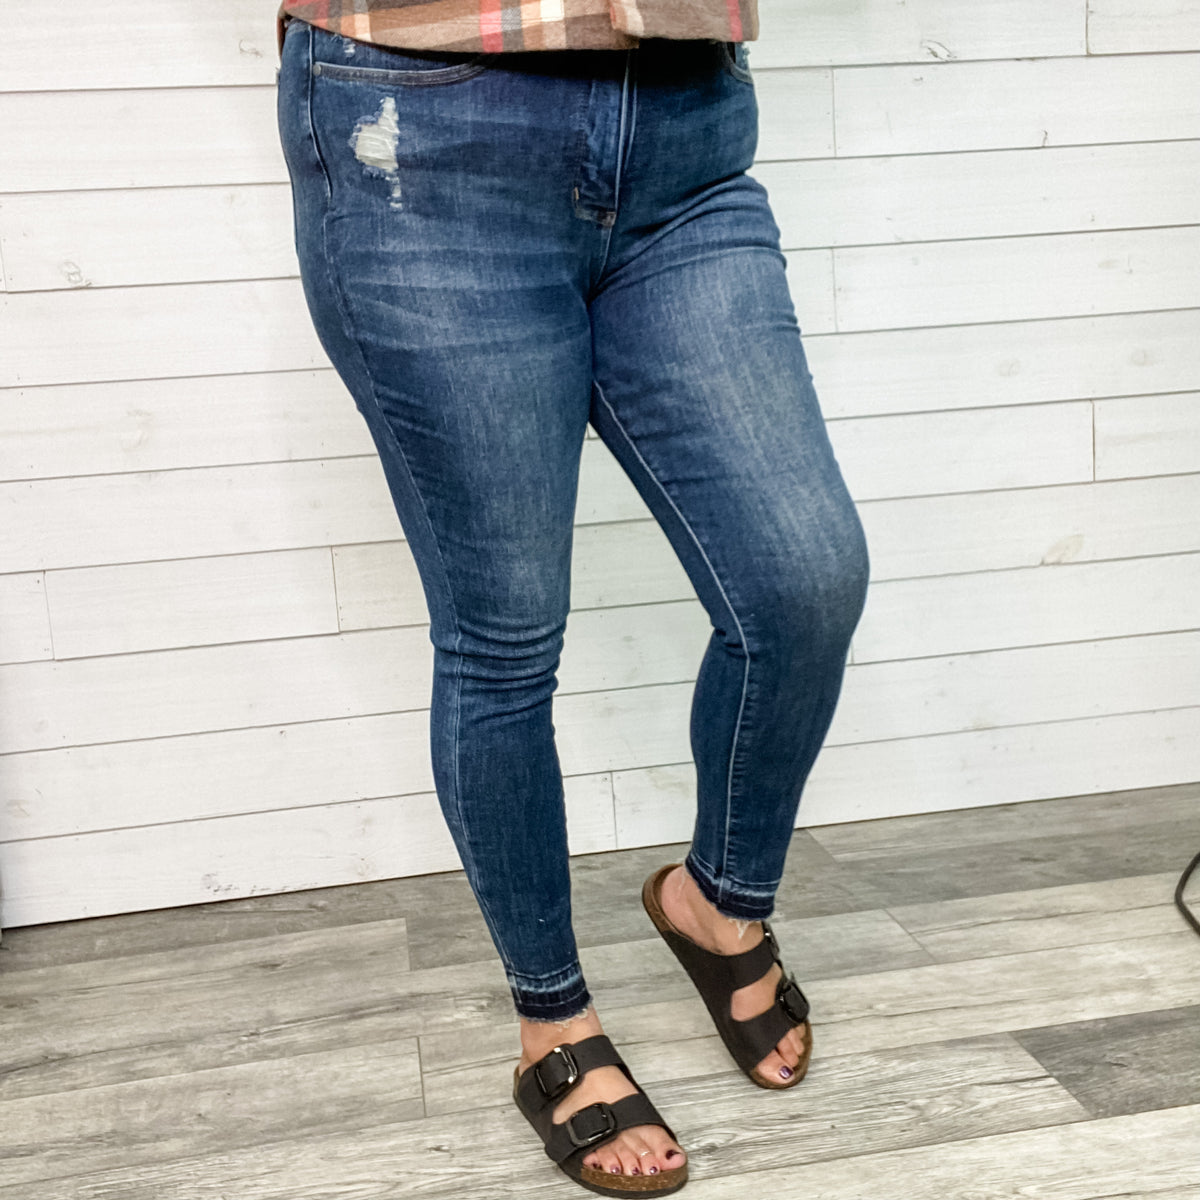 Reviewing Judy Blue jeans on a size 14/16 with an apron belly